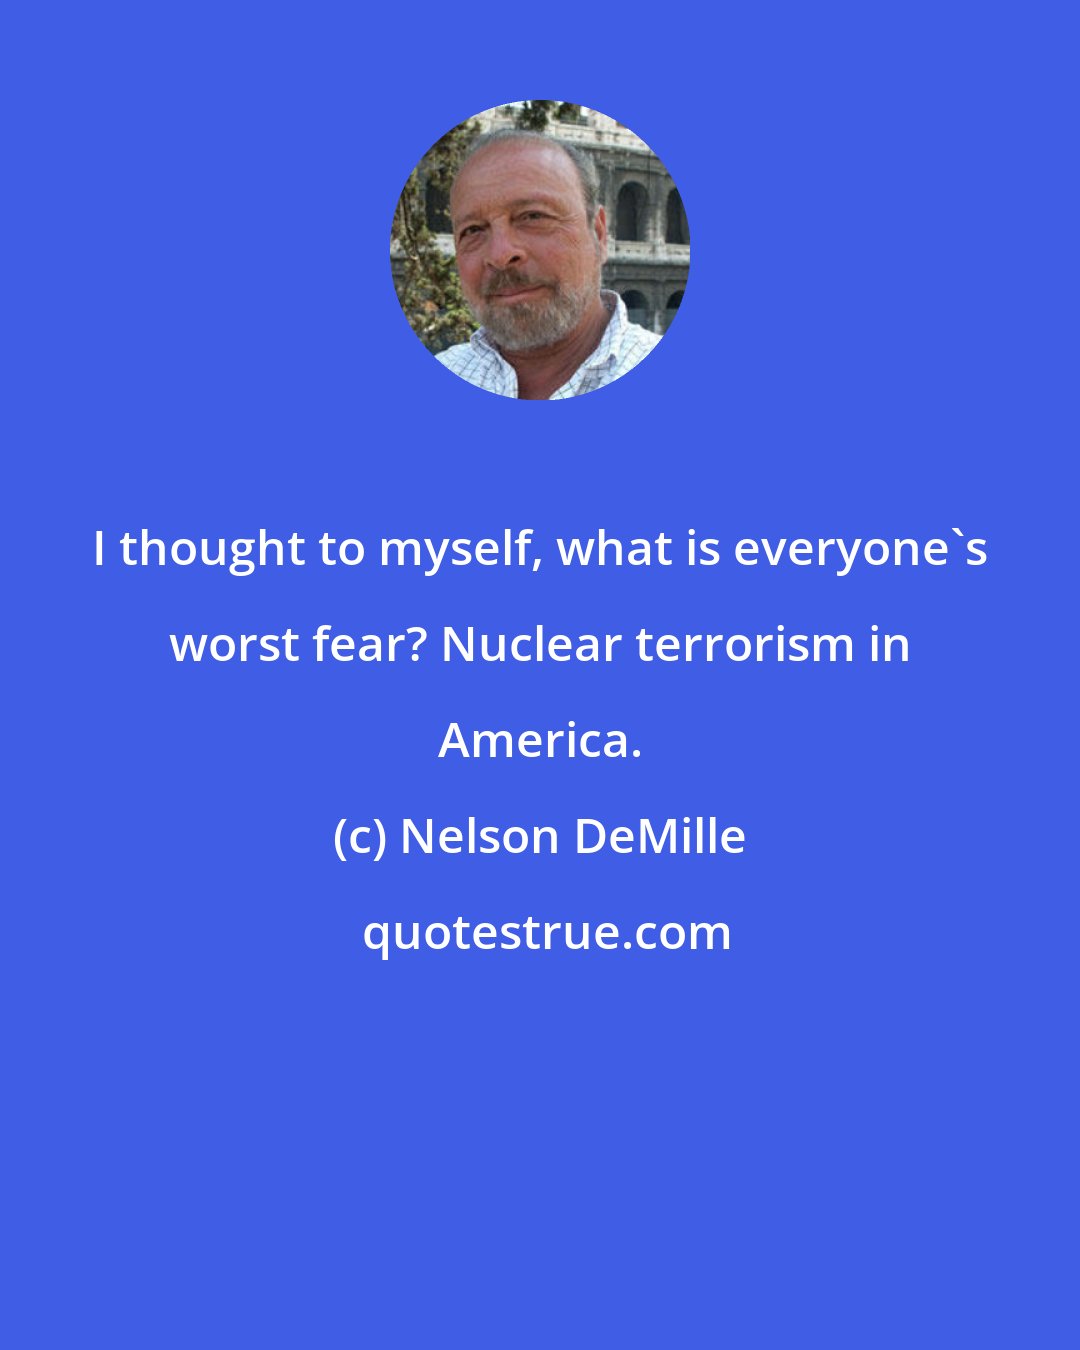 Nelson DeMille: I thought to myself, what is everyone's worst fear? Nuclear terrorism in America.